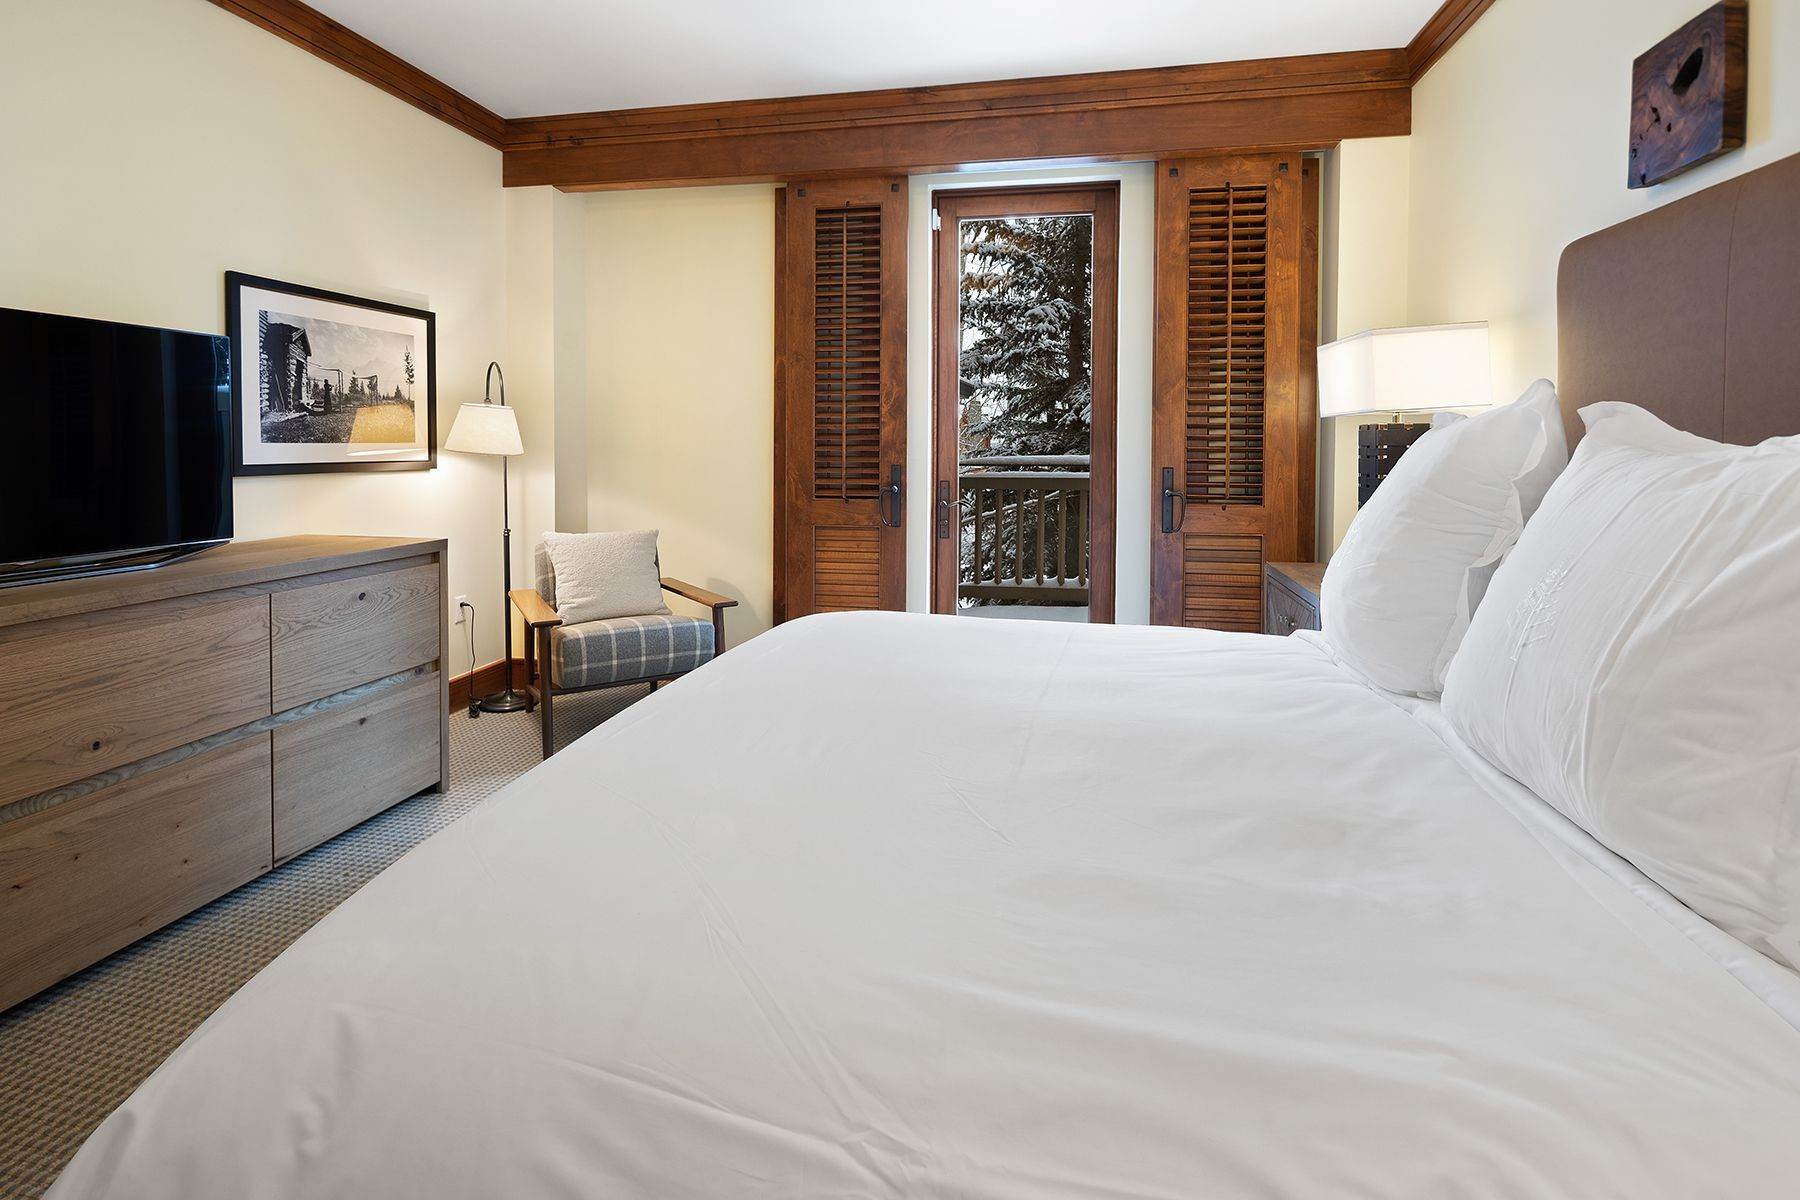 21. Fractional Ownership Property for Sale at Residence Club at the Four Seasons 7680 Granite Loop Road, #651 Teton Village, Wyoming 83025 United States